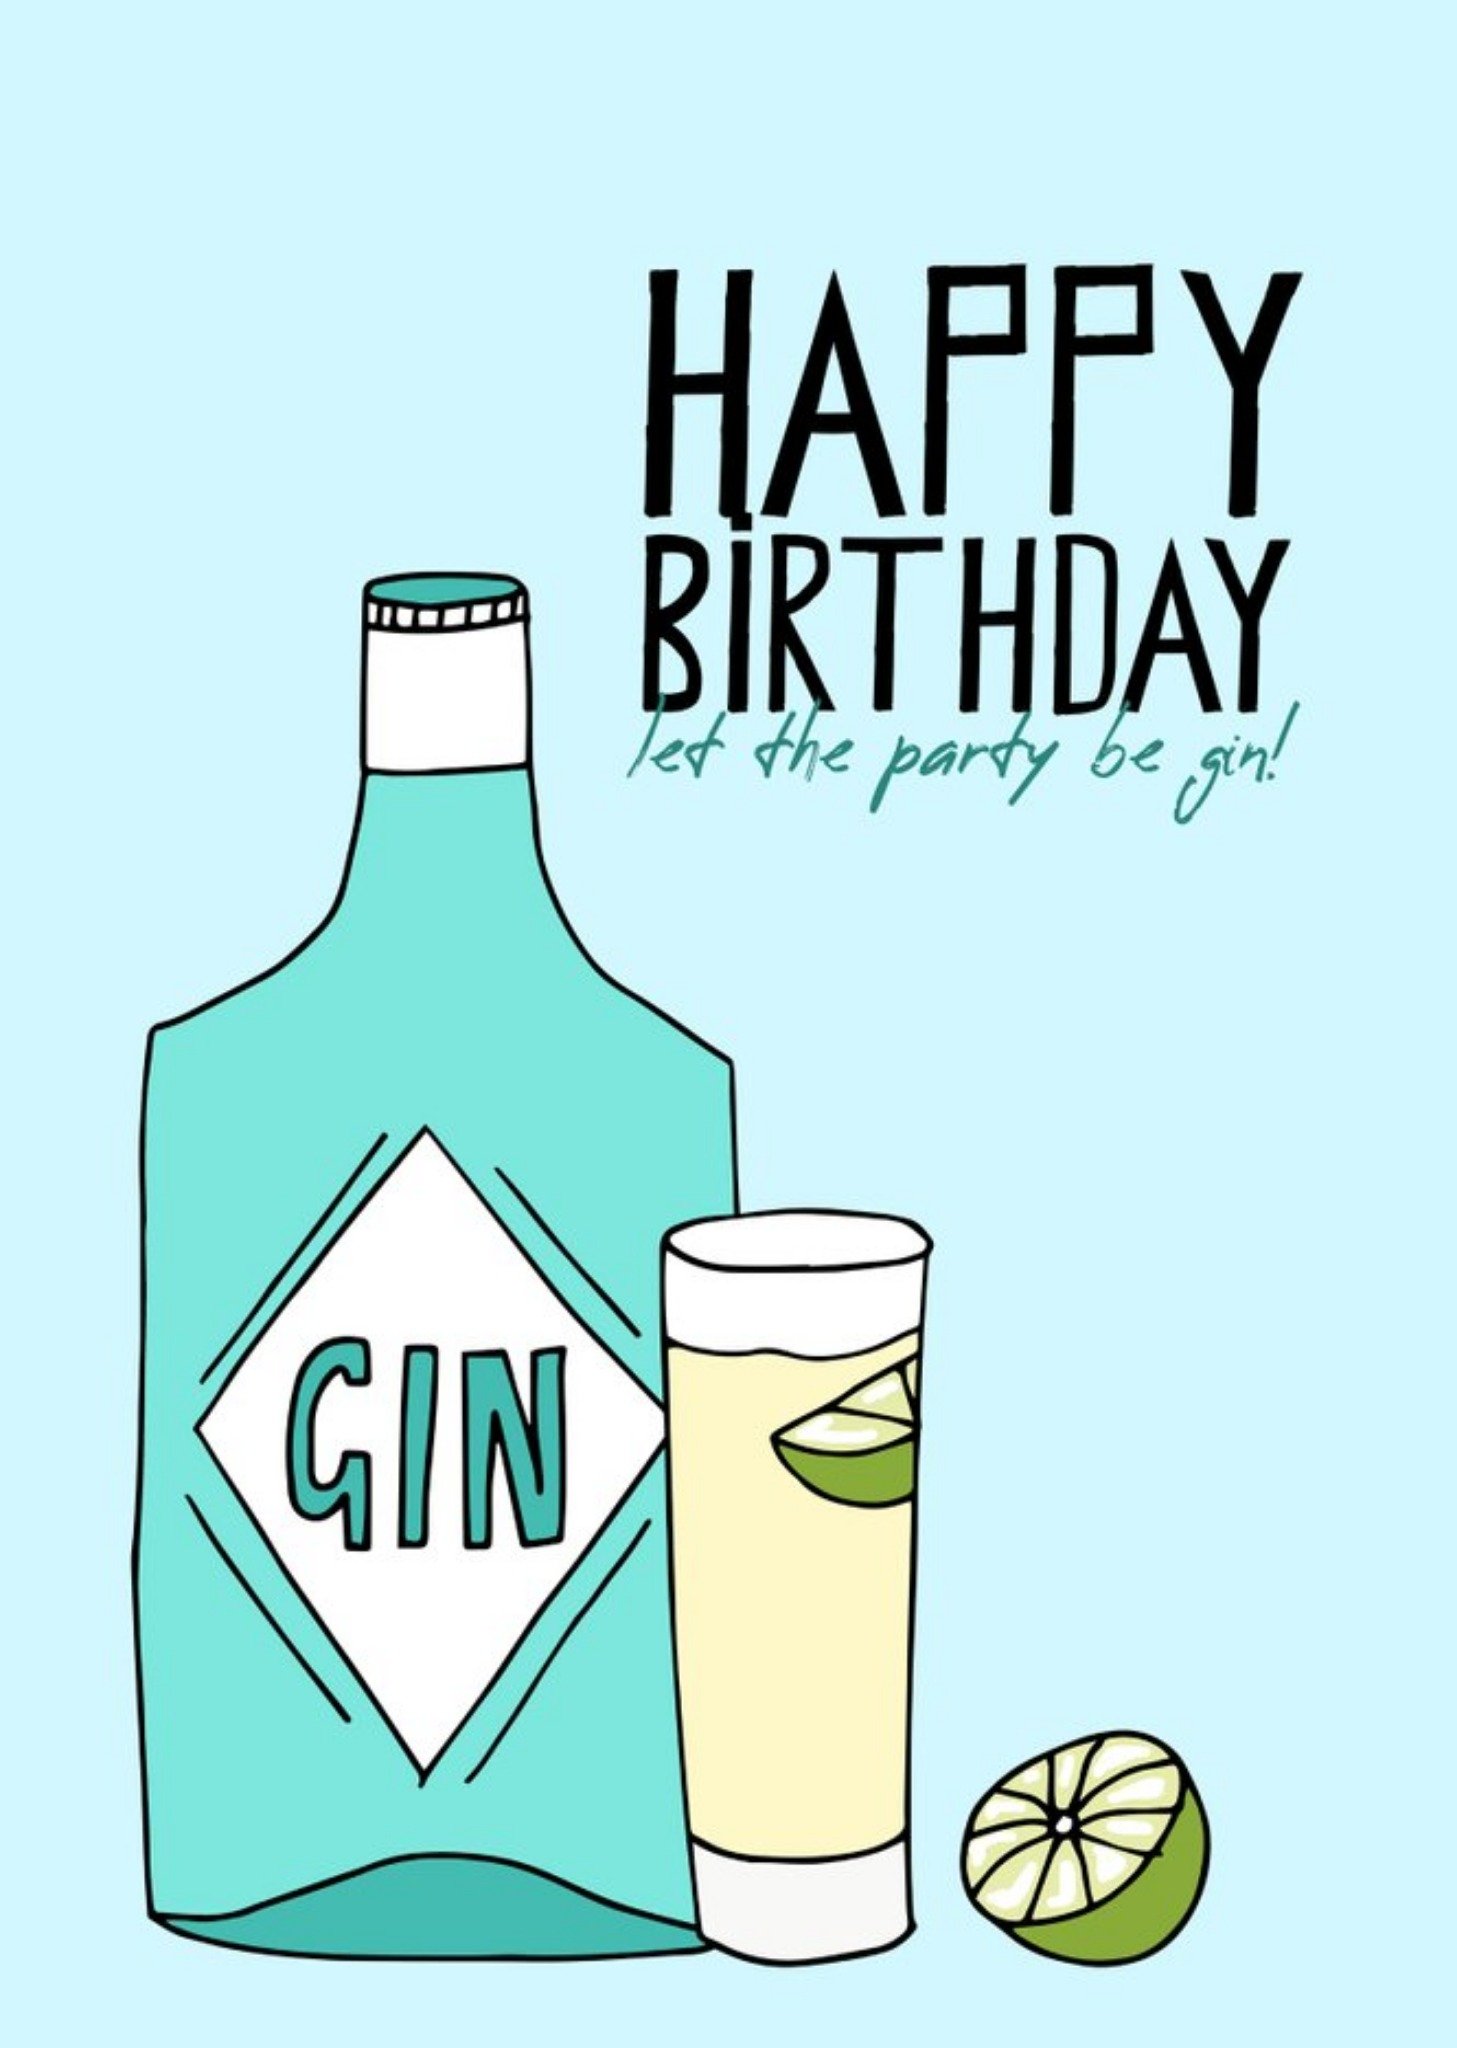 Moonpig Colourful Illustration Happy Birthday Let The Party Be Gin Card Ecard